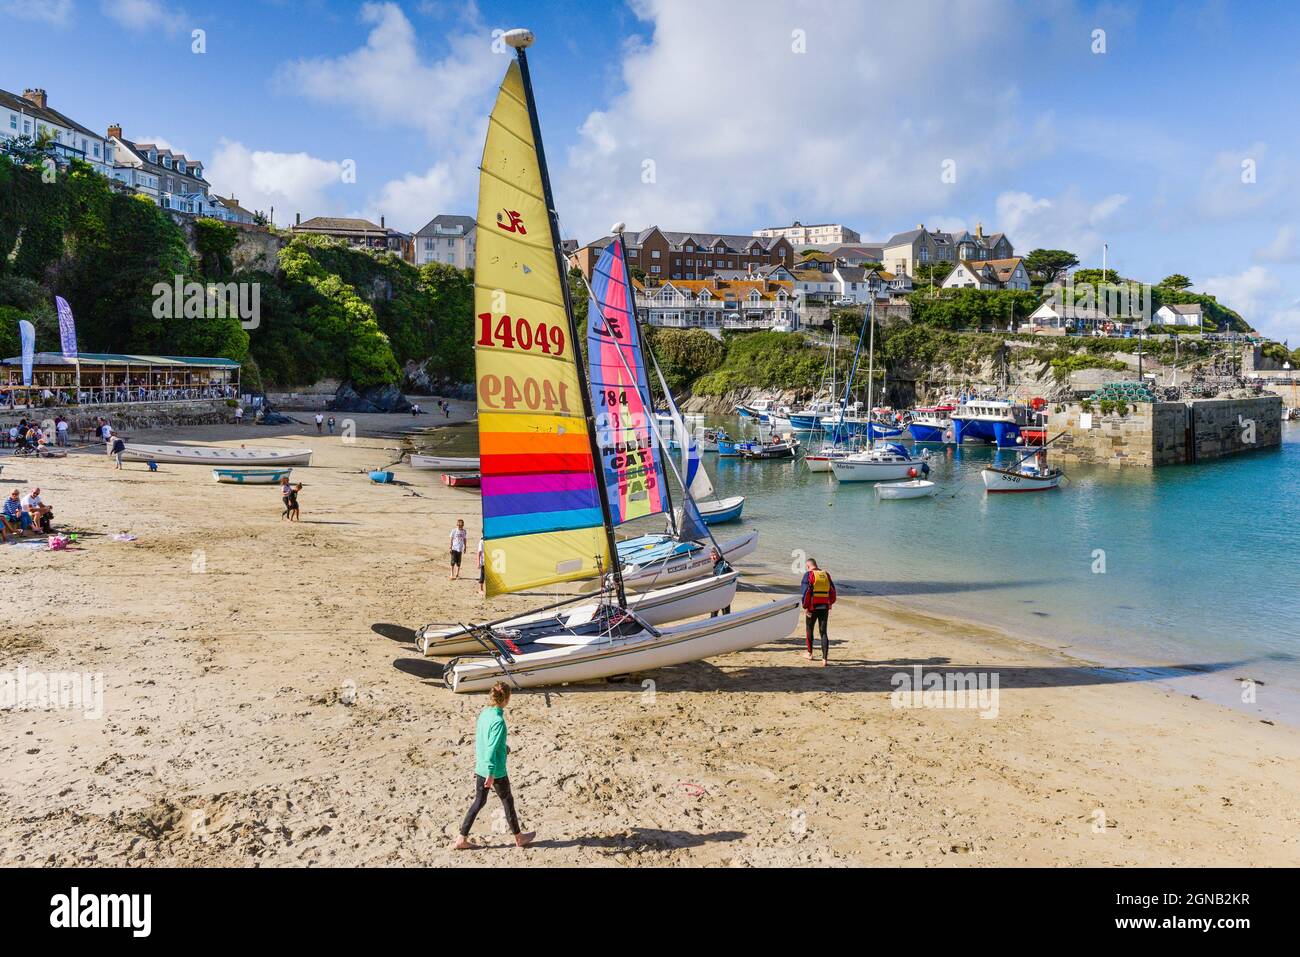 Catamarans with colourful sails beached in the historic picturesque working Newquay Harbour in Newquay on the North Cornwall coast. Stock Photo